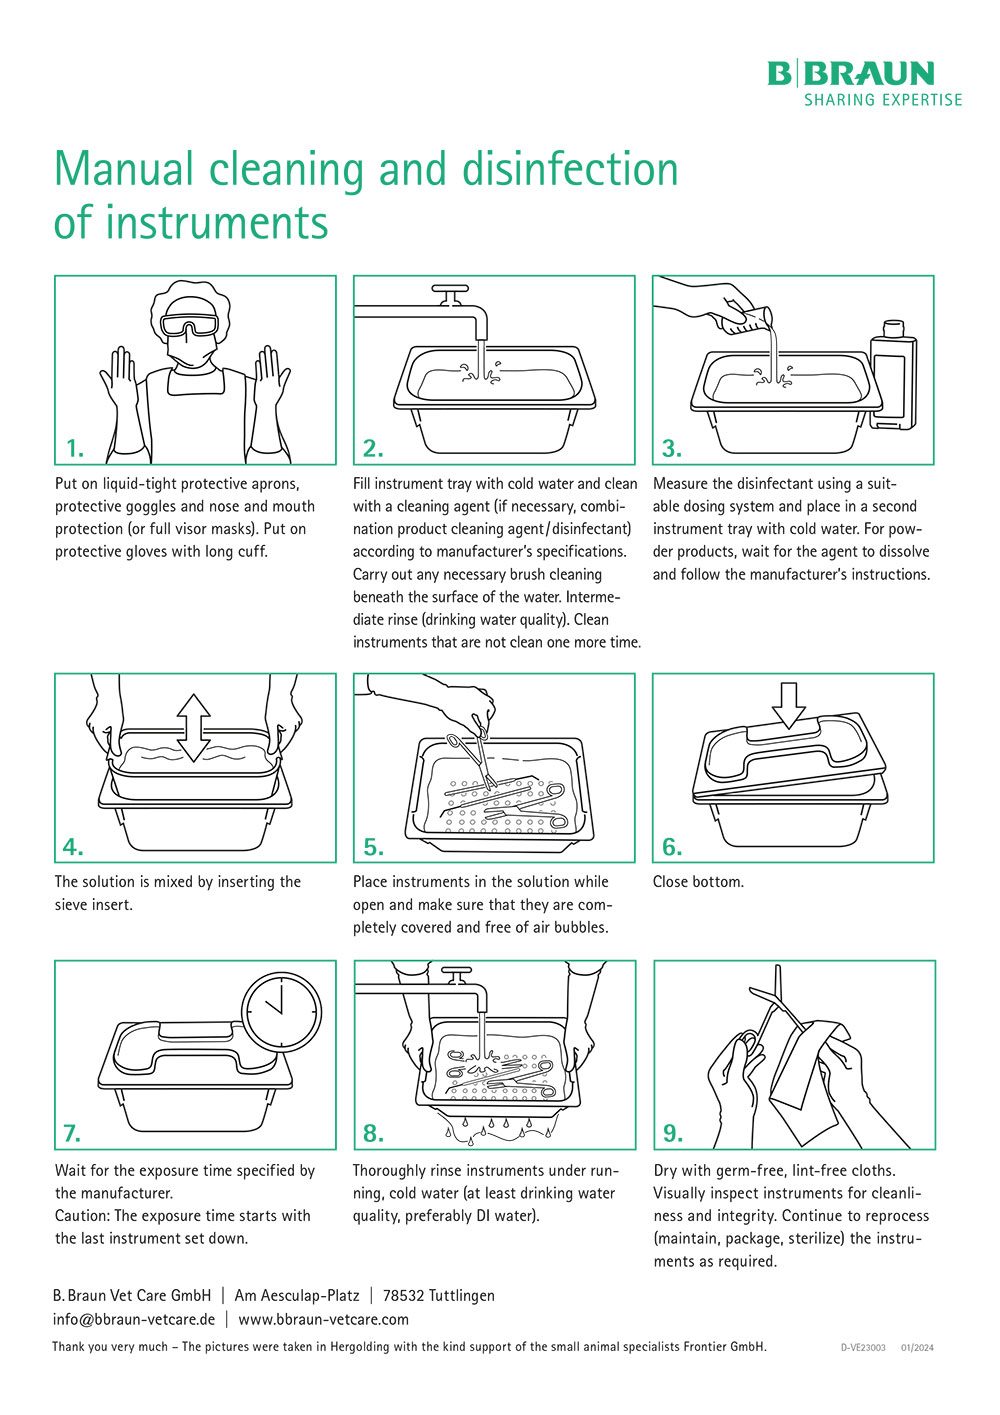 Step-by-step guide: Manual cleaning and disinfection of instruments